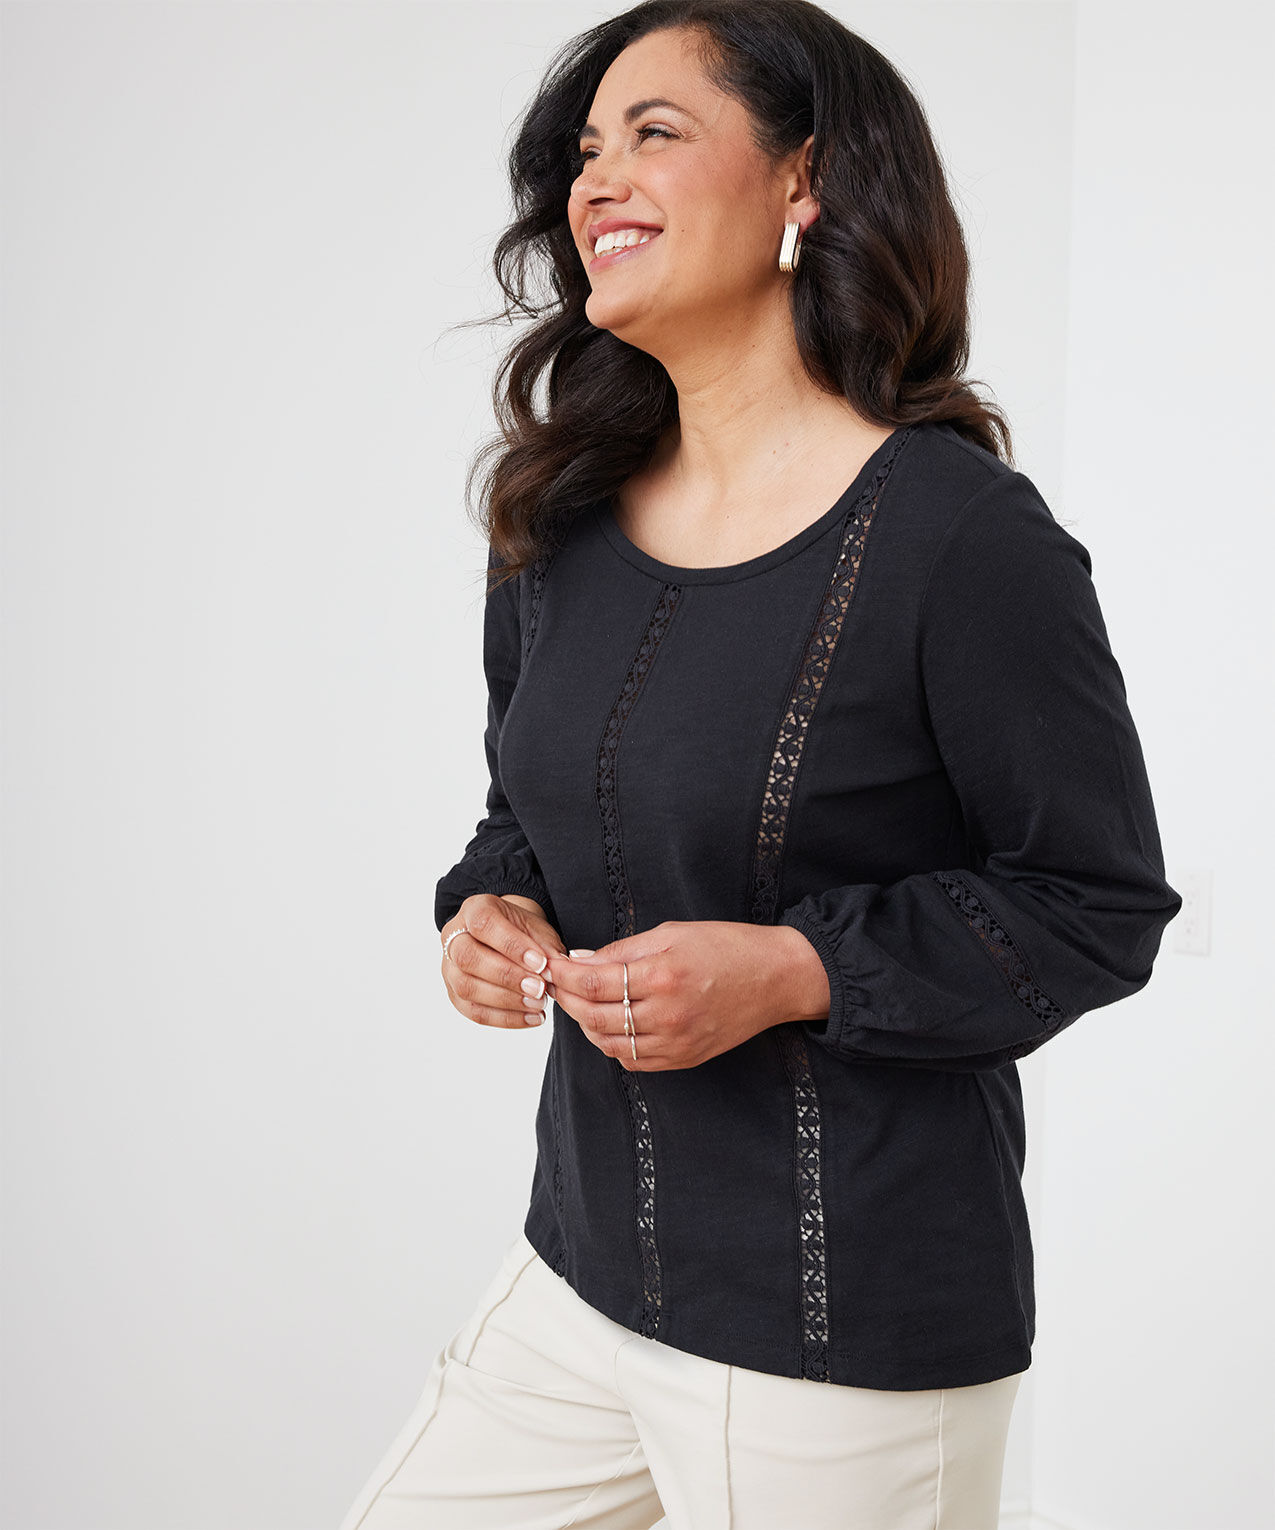 Long Sleeve Top with Crochet Inserts